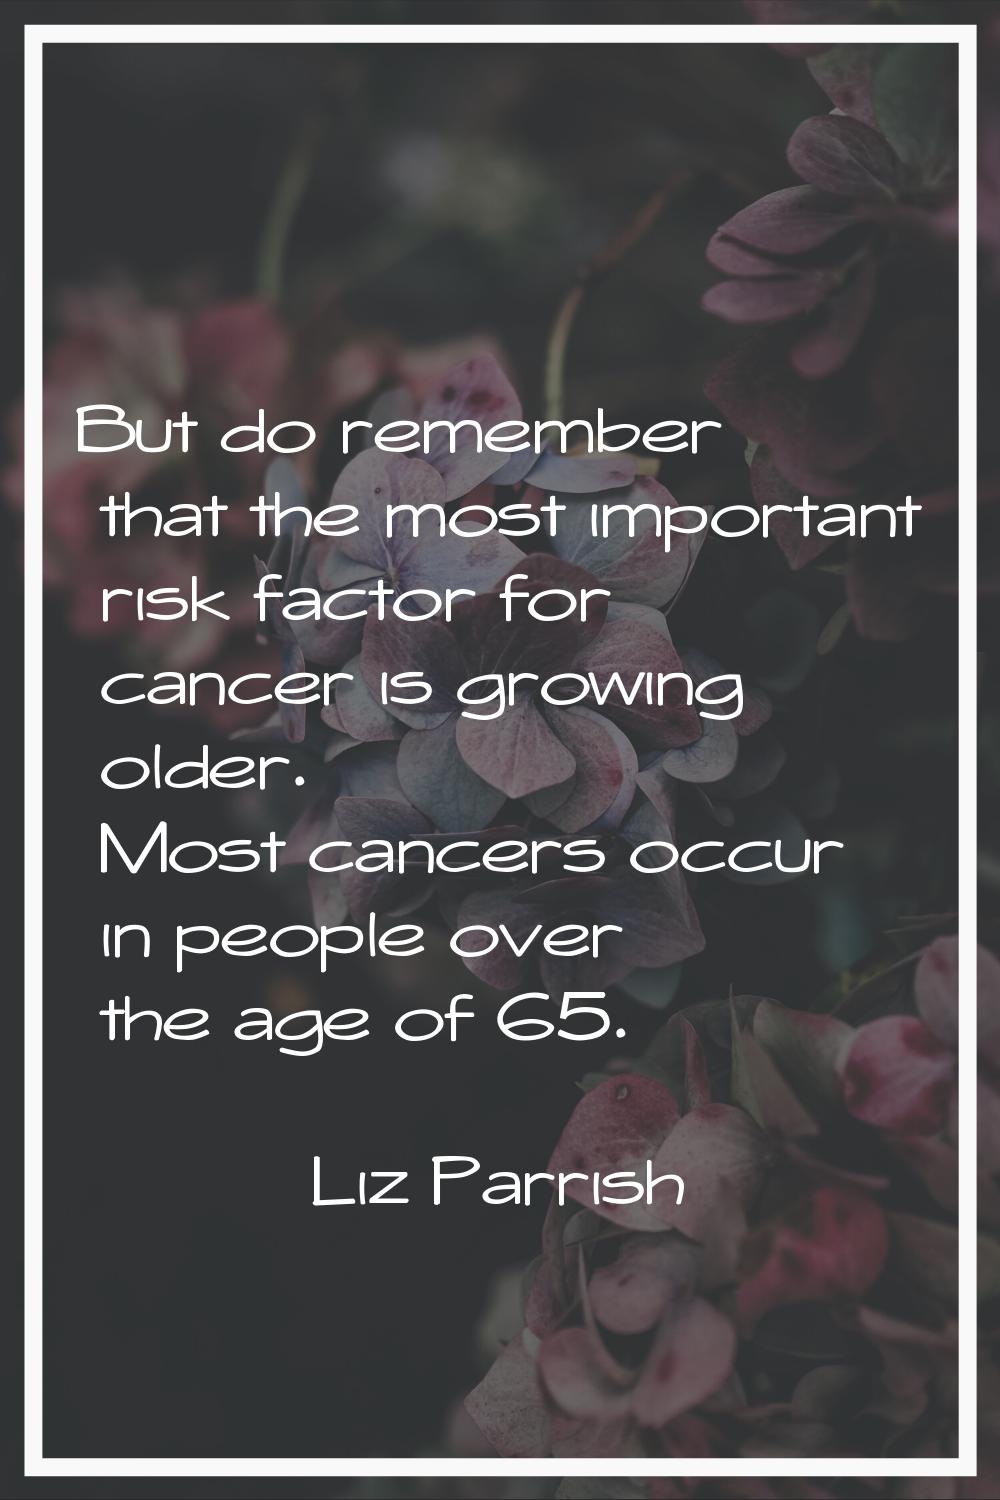 But do remember that the most important risk factor for cancer is growing older. Most cancers occur